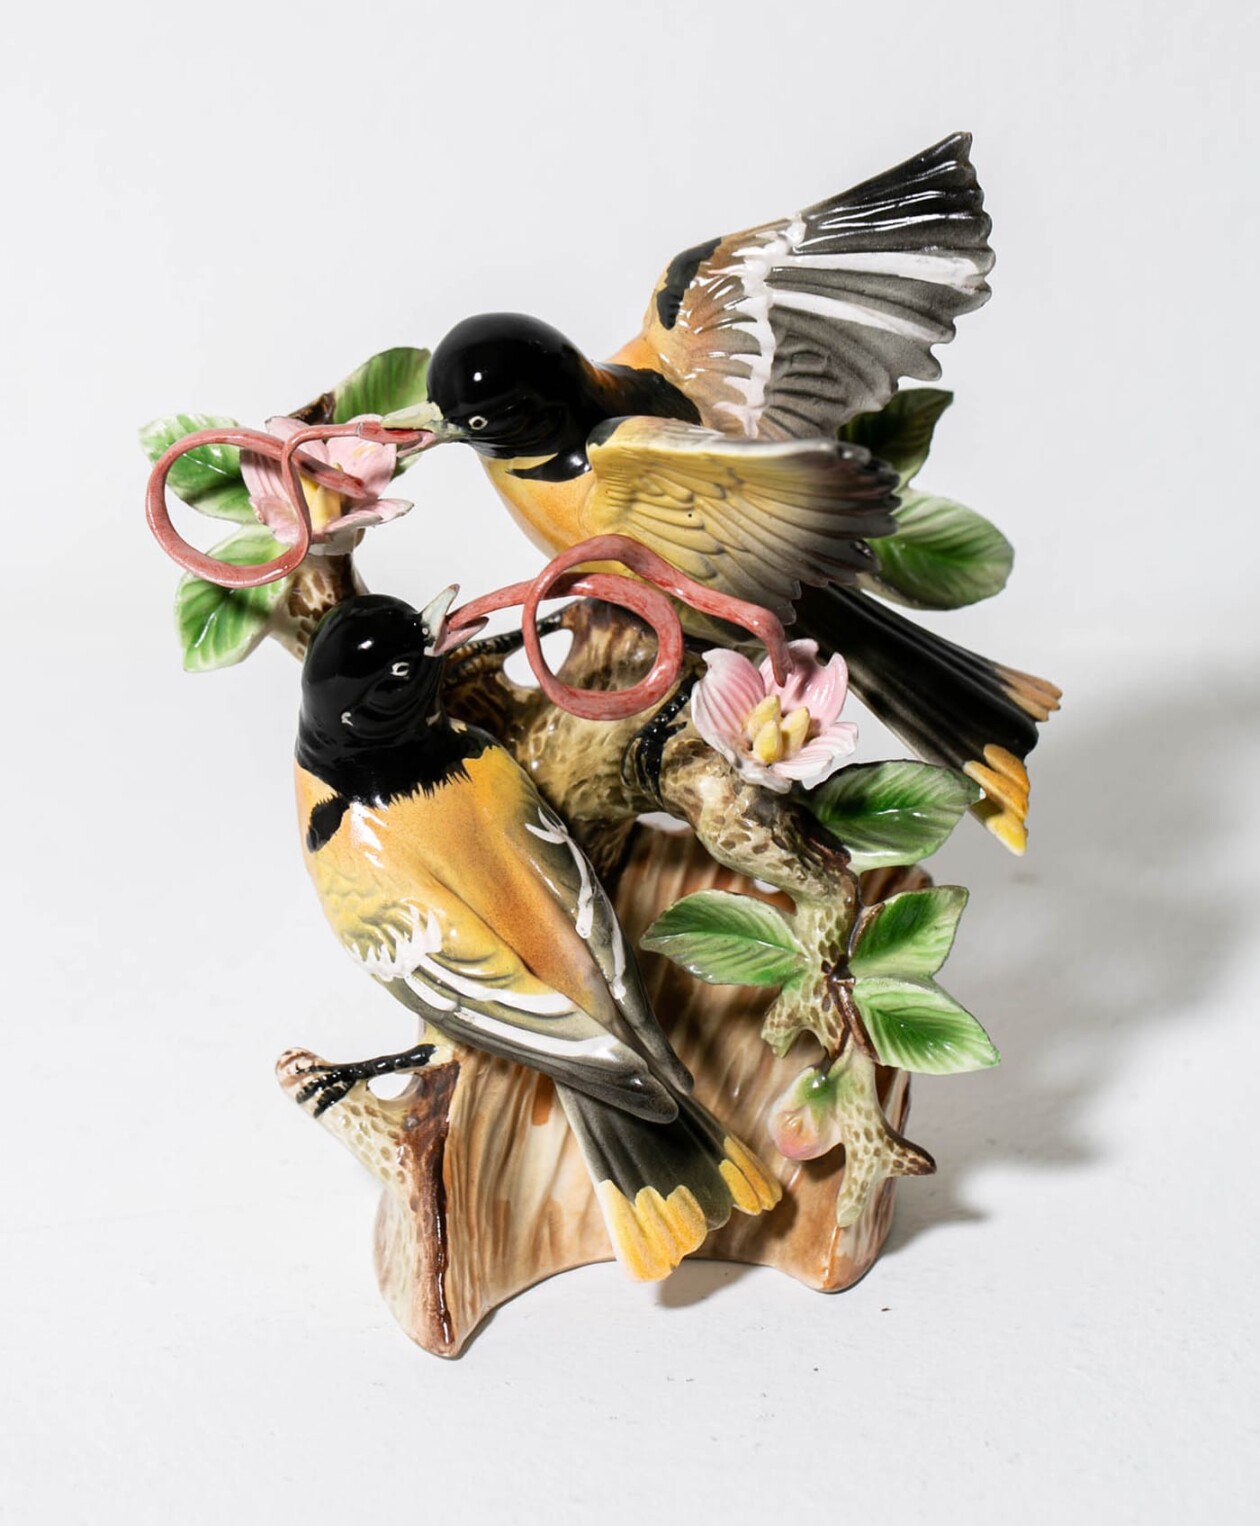 Debra Broz Brings To Life Uncanny Beings By Creating Unexpected Mashups Between Animals, Plants, And Humans (18)